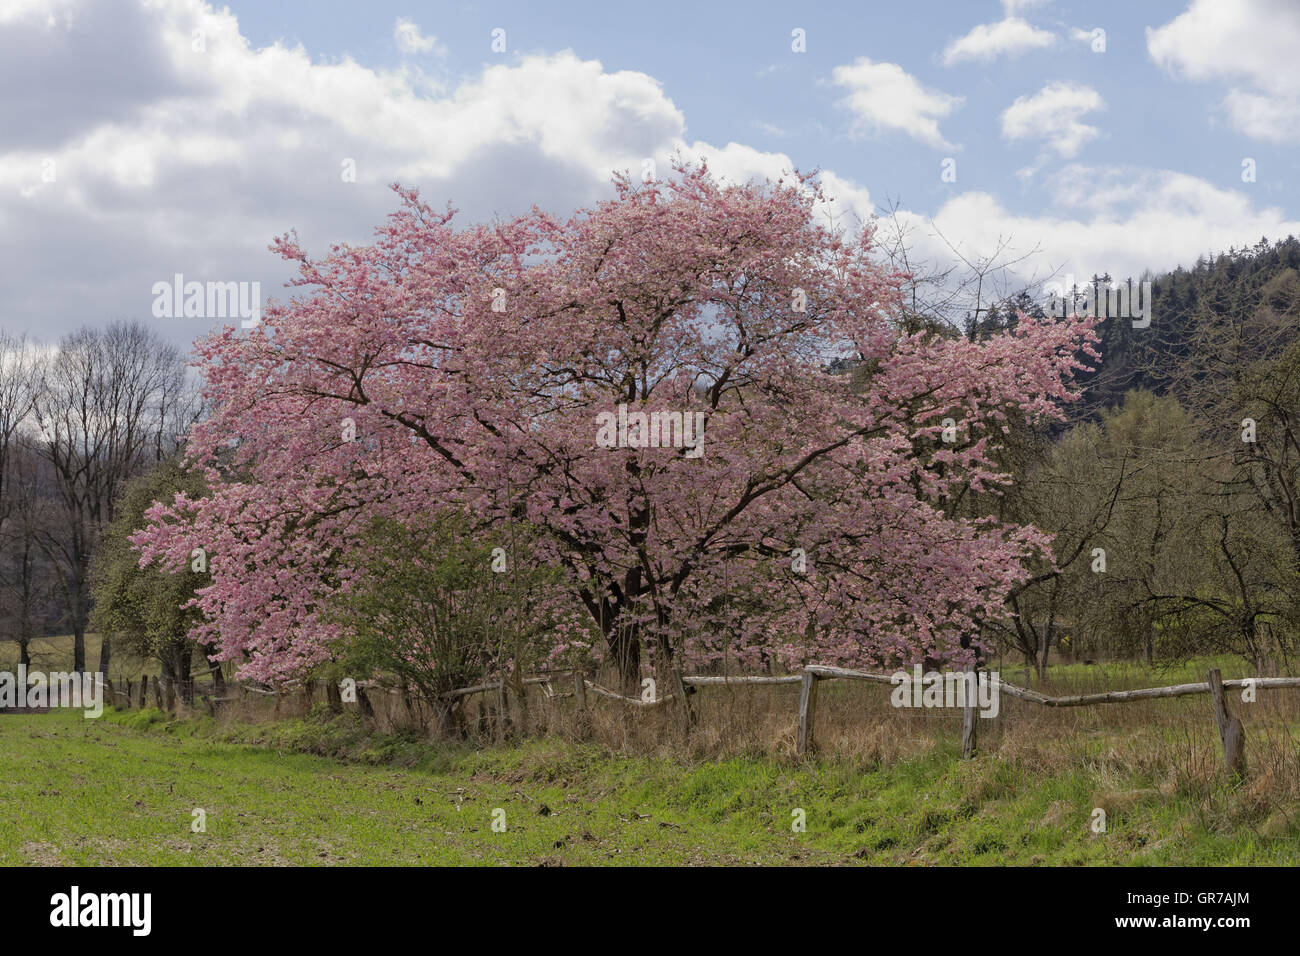 Japanese Cherry Tree In Spring, With Teutoburg Forest In The Background, Lower Saxony, Germany, Europe Stock Photo